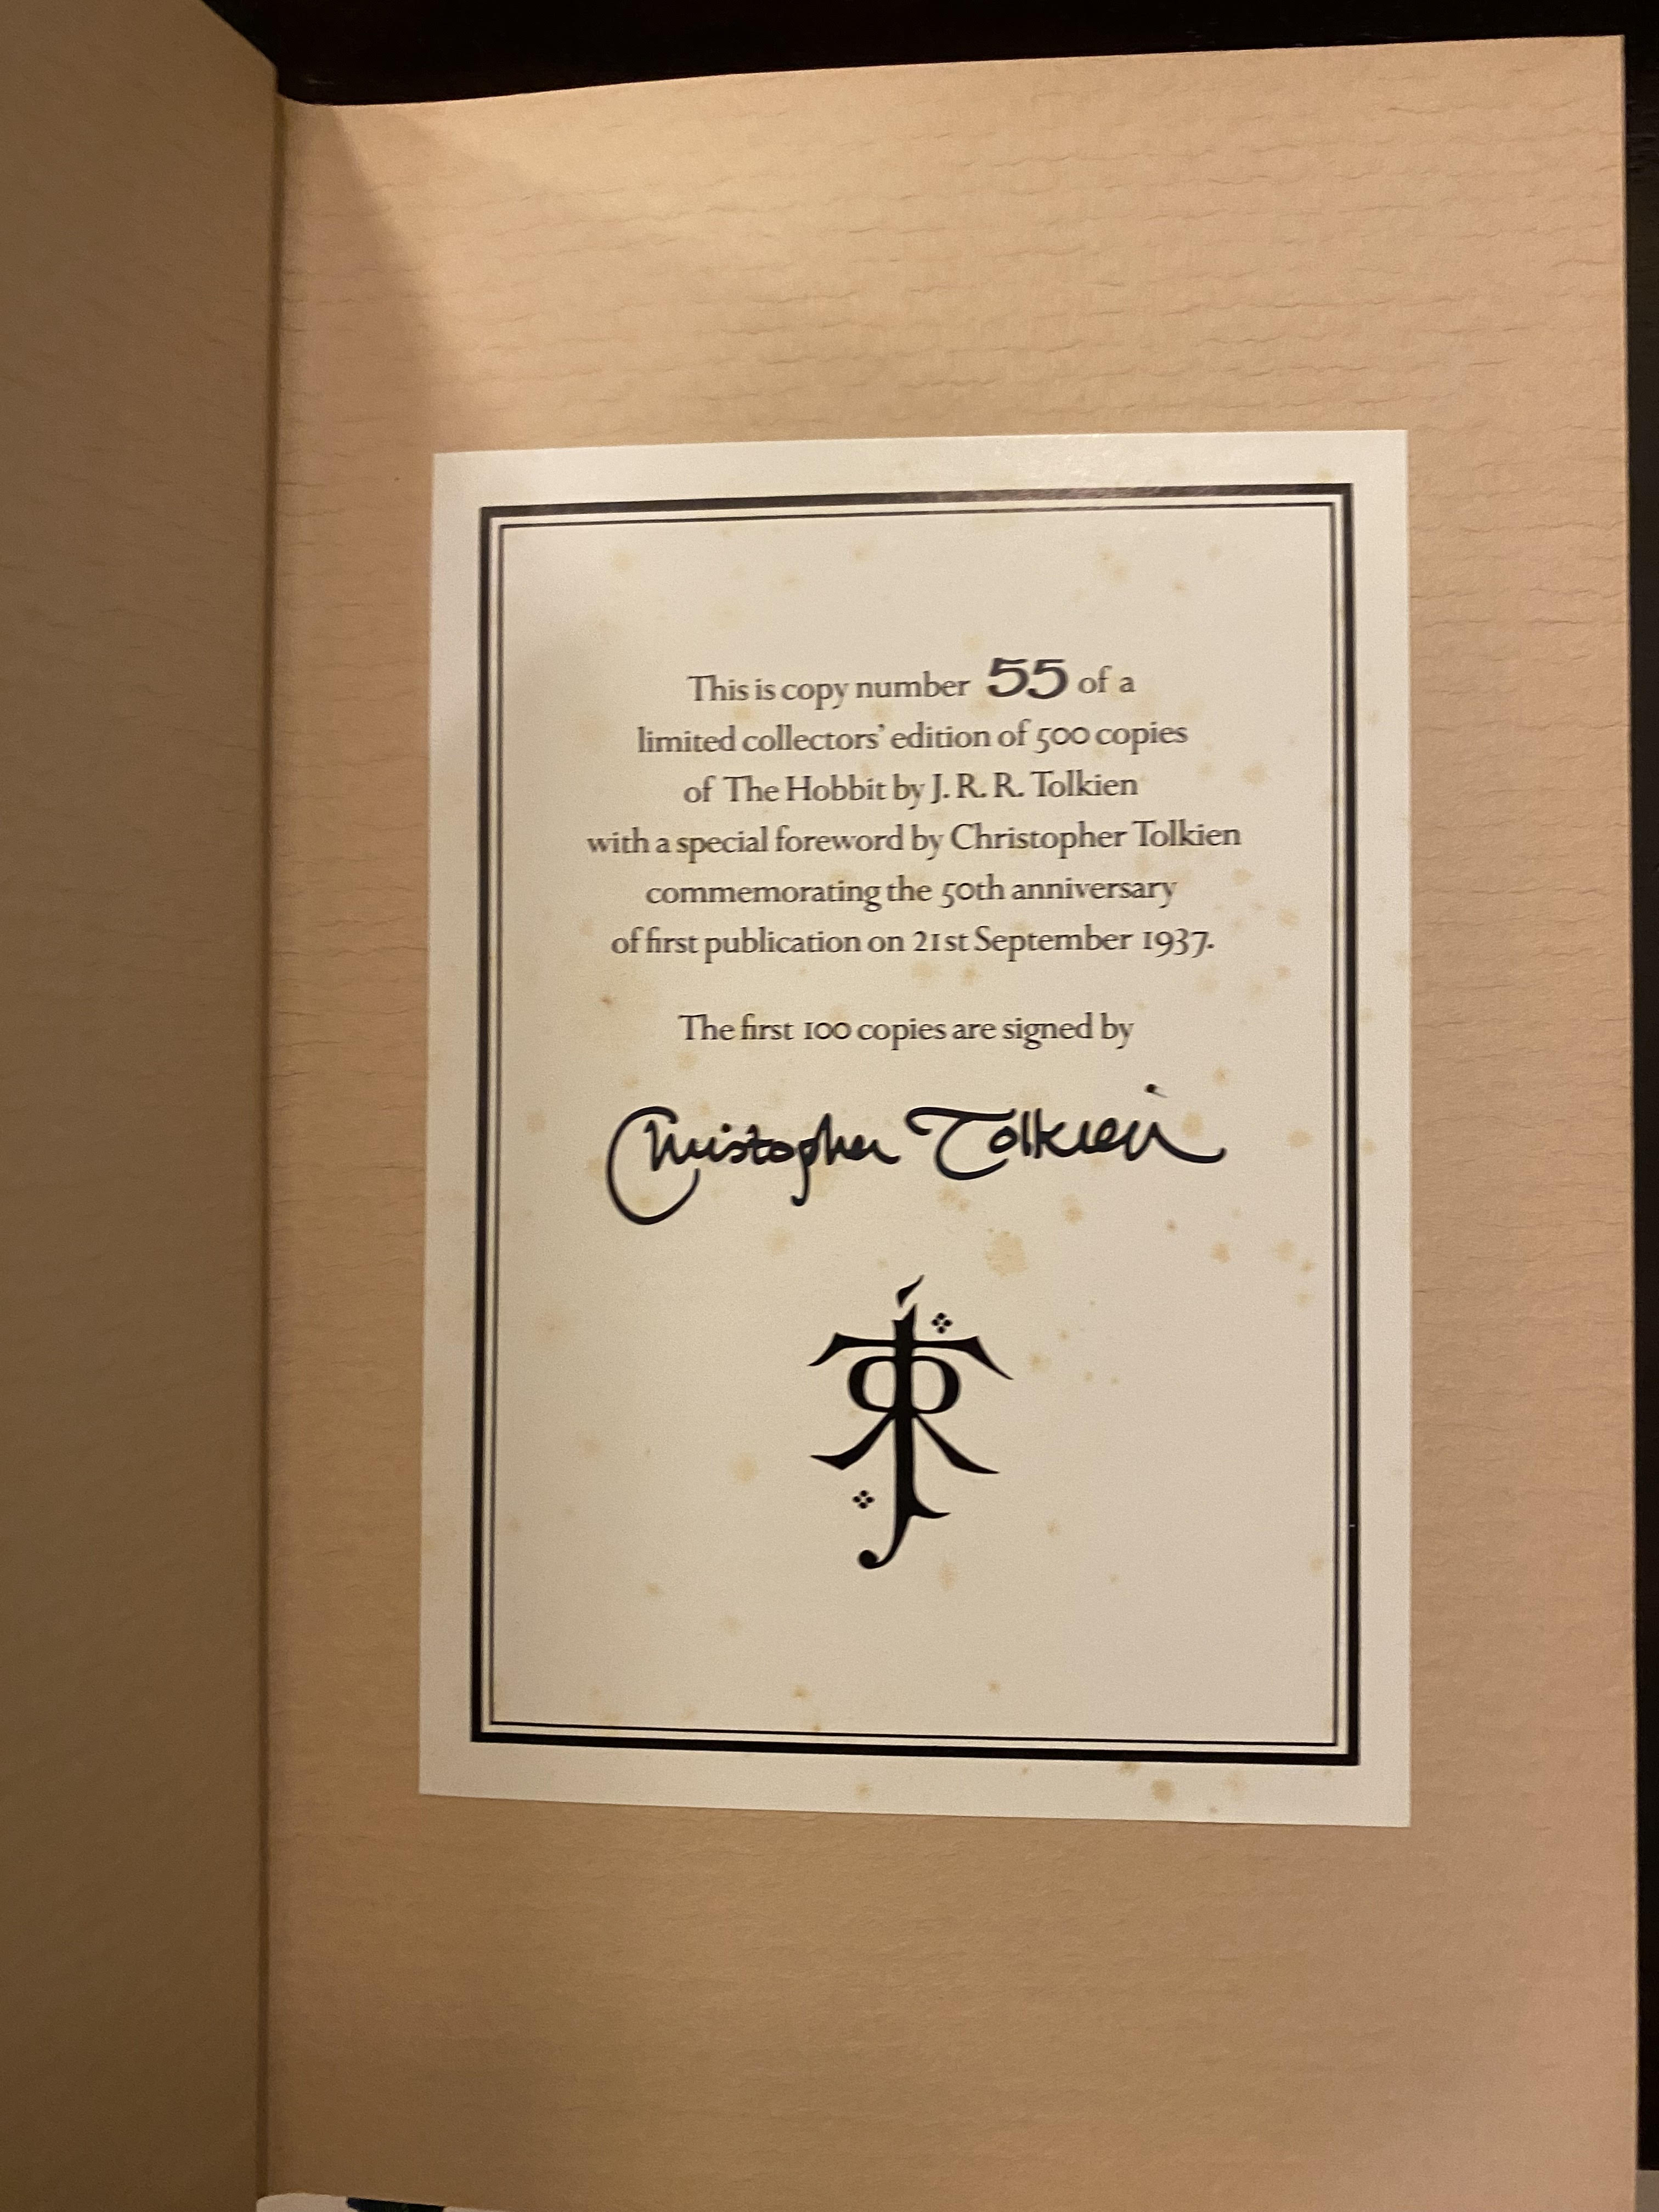 This Limited Numbered Edition, signed by Christopher Tolkien, was published in 1987 to celebrate the 50th Anniversary of the original publication of The Hobbit.